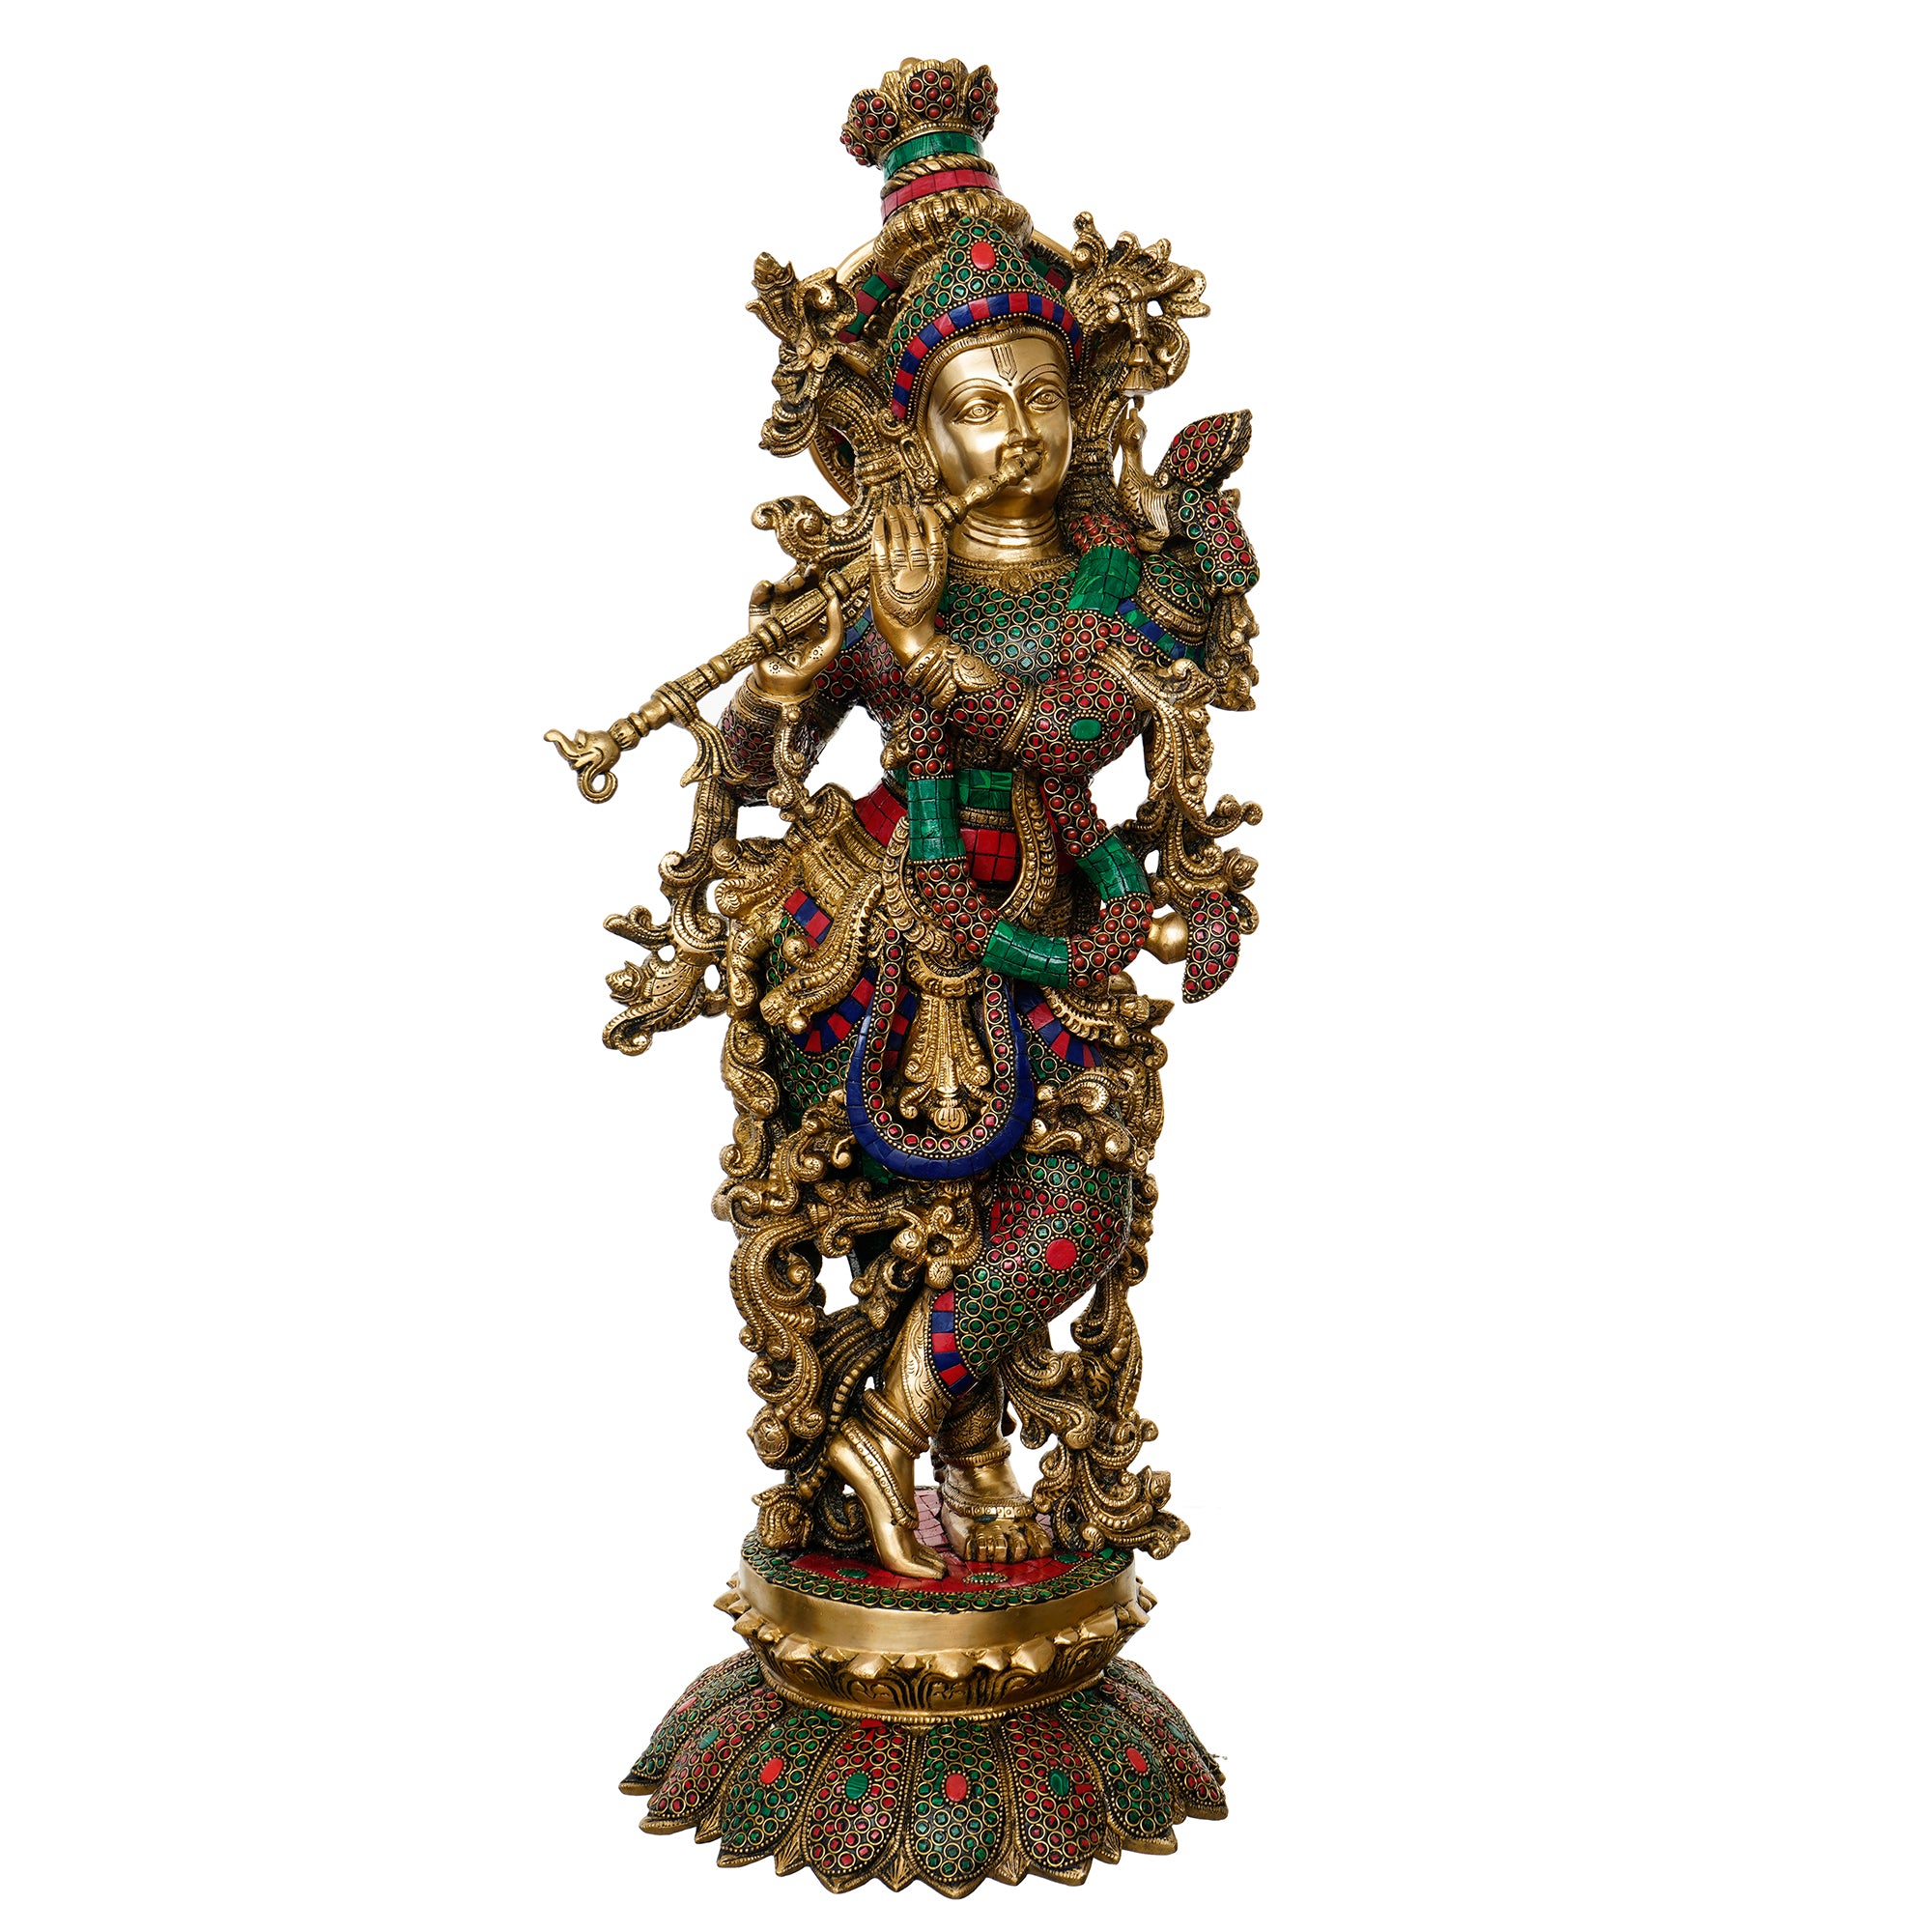 Golden Lord Krishna Playing Flute Handcrafted Brass Idol with Colorful Stone Work 2